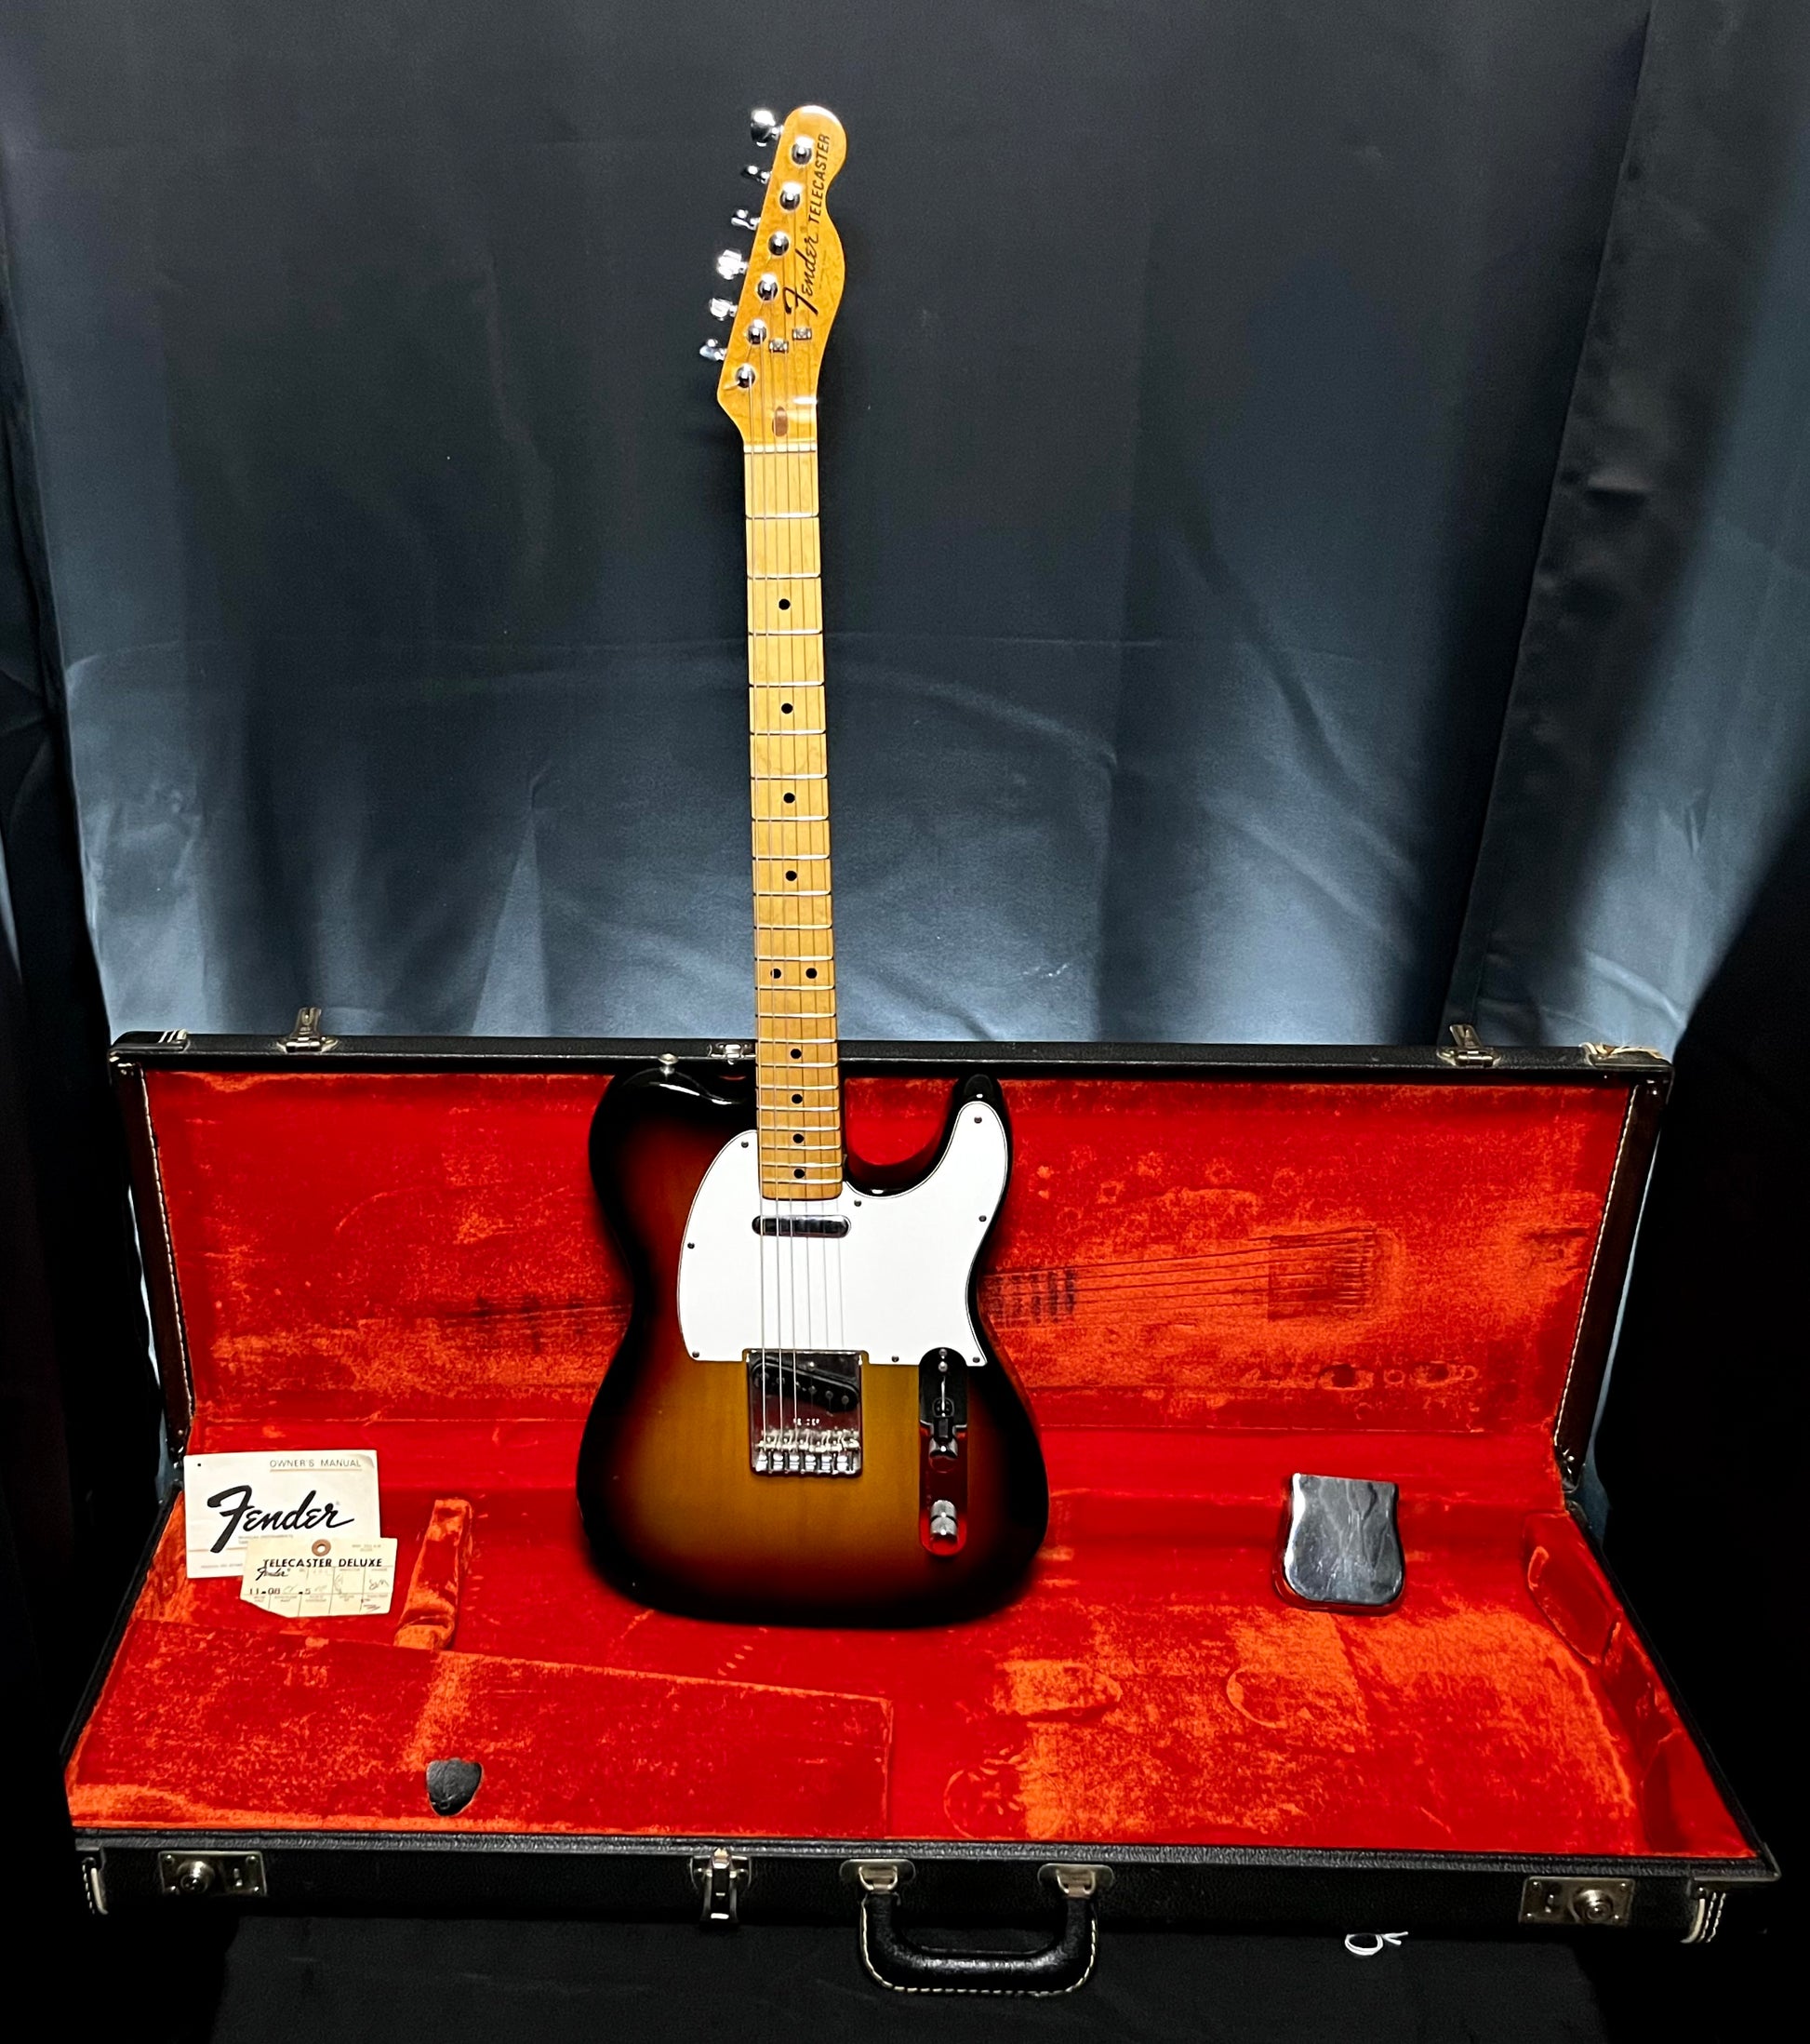 Guitar in case of Used Vintage 1975 Fender Telecaster 3 Color Sunburst w/Changed Tuners w/OHSC TFW27